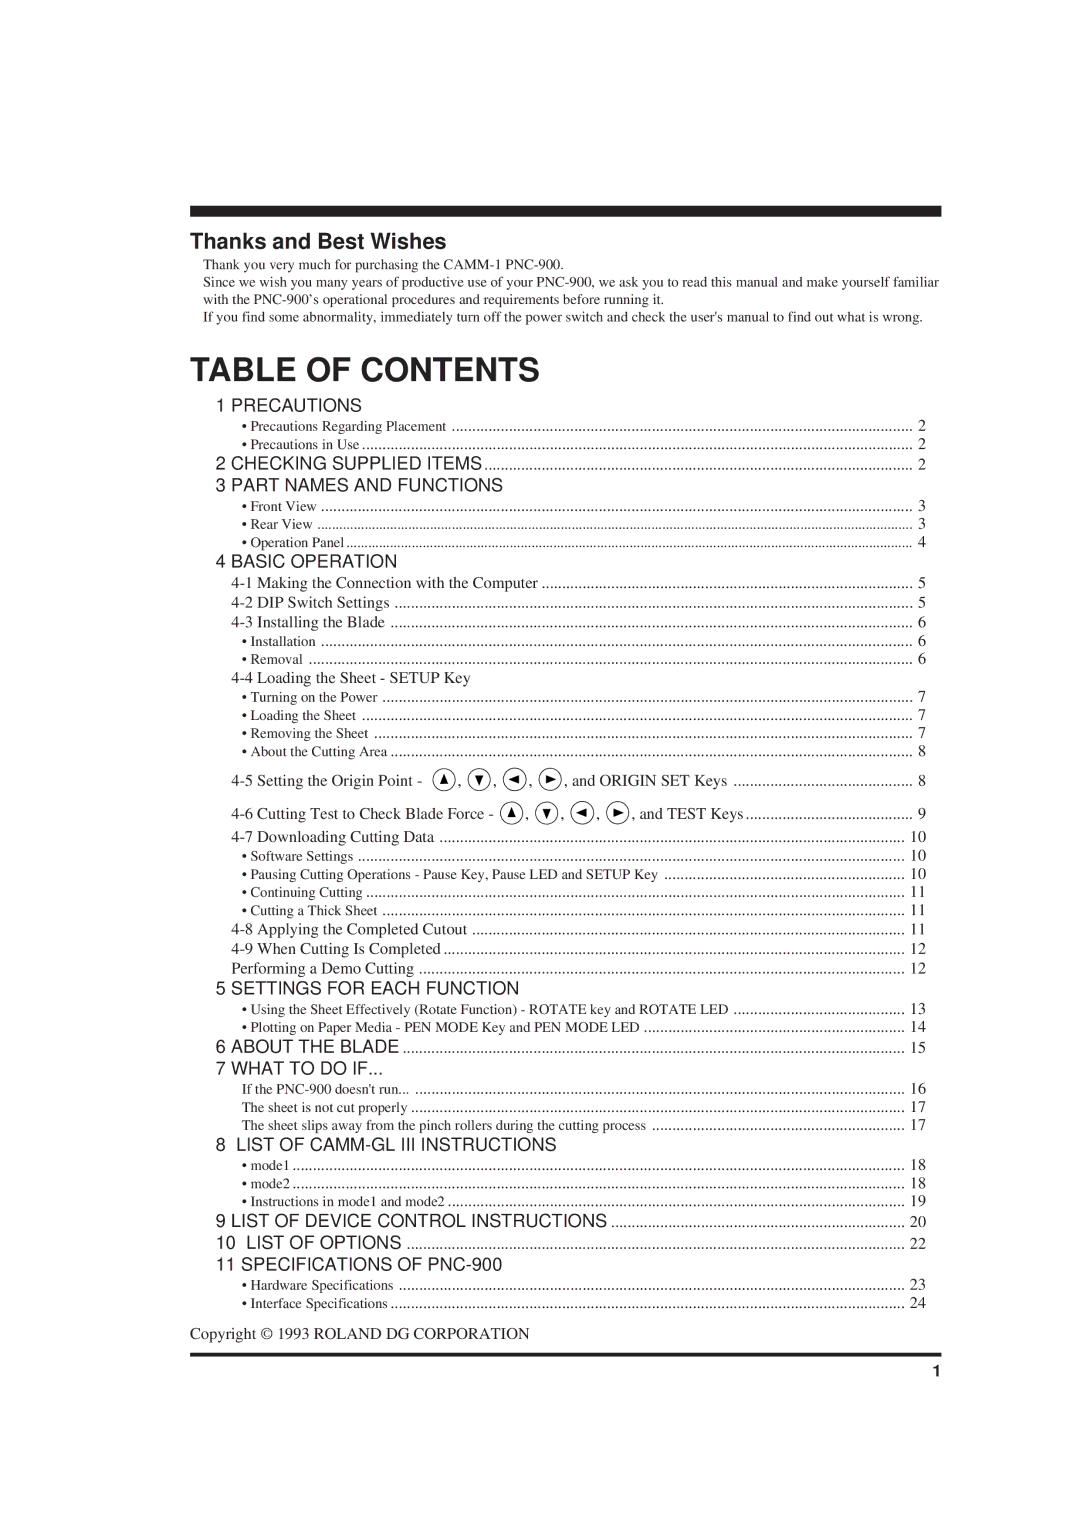 Roland PNC-900 user manual Table of Contents 